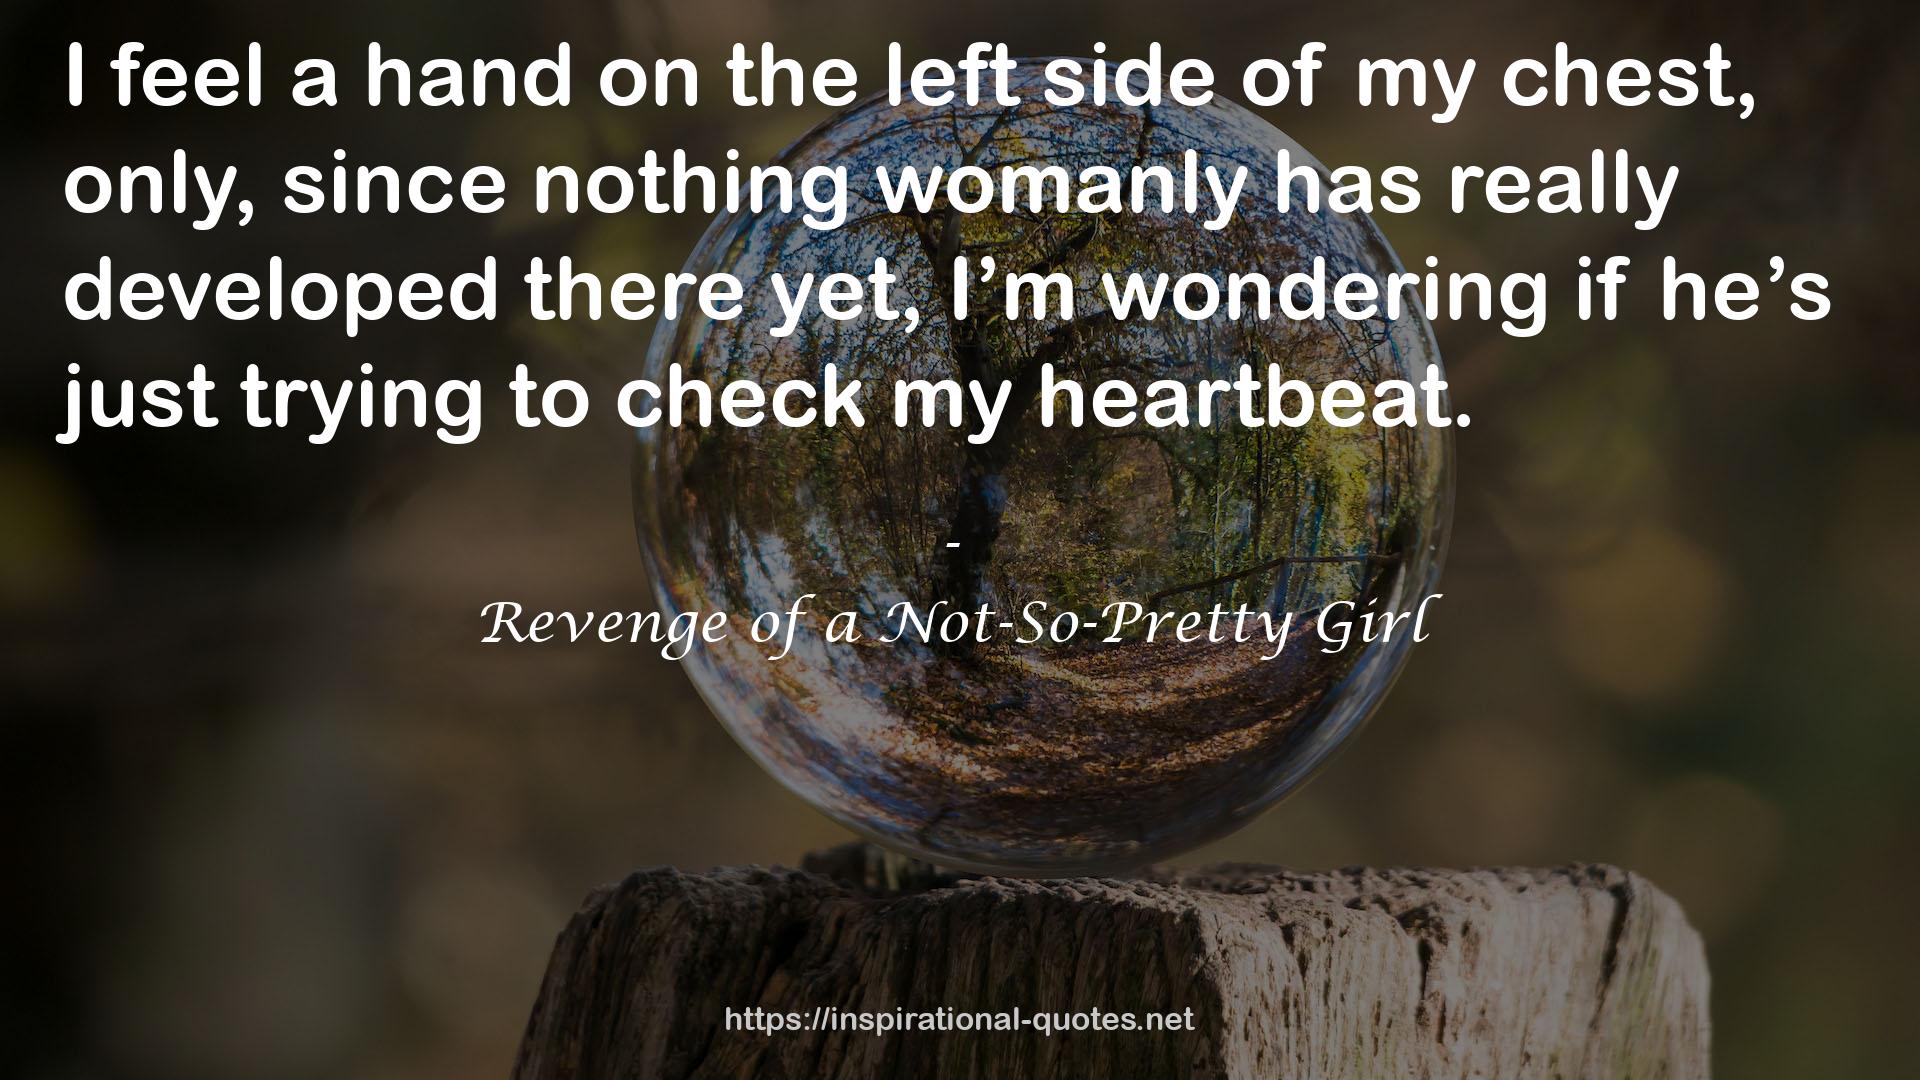 Revenge of a Not-So-Pretty Girl QUOTES